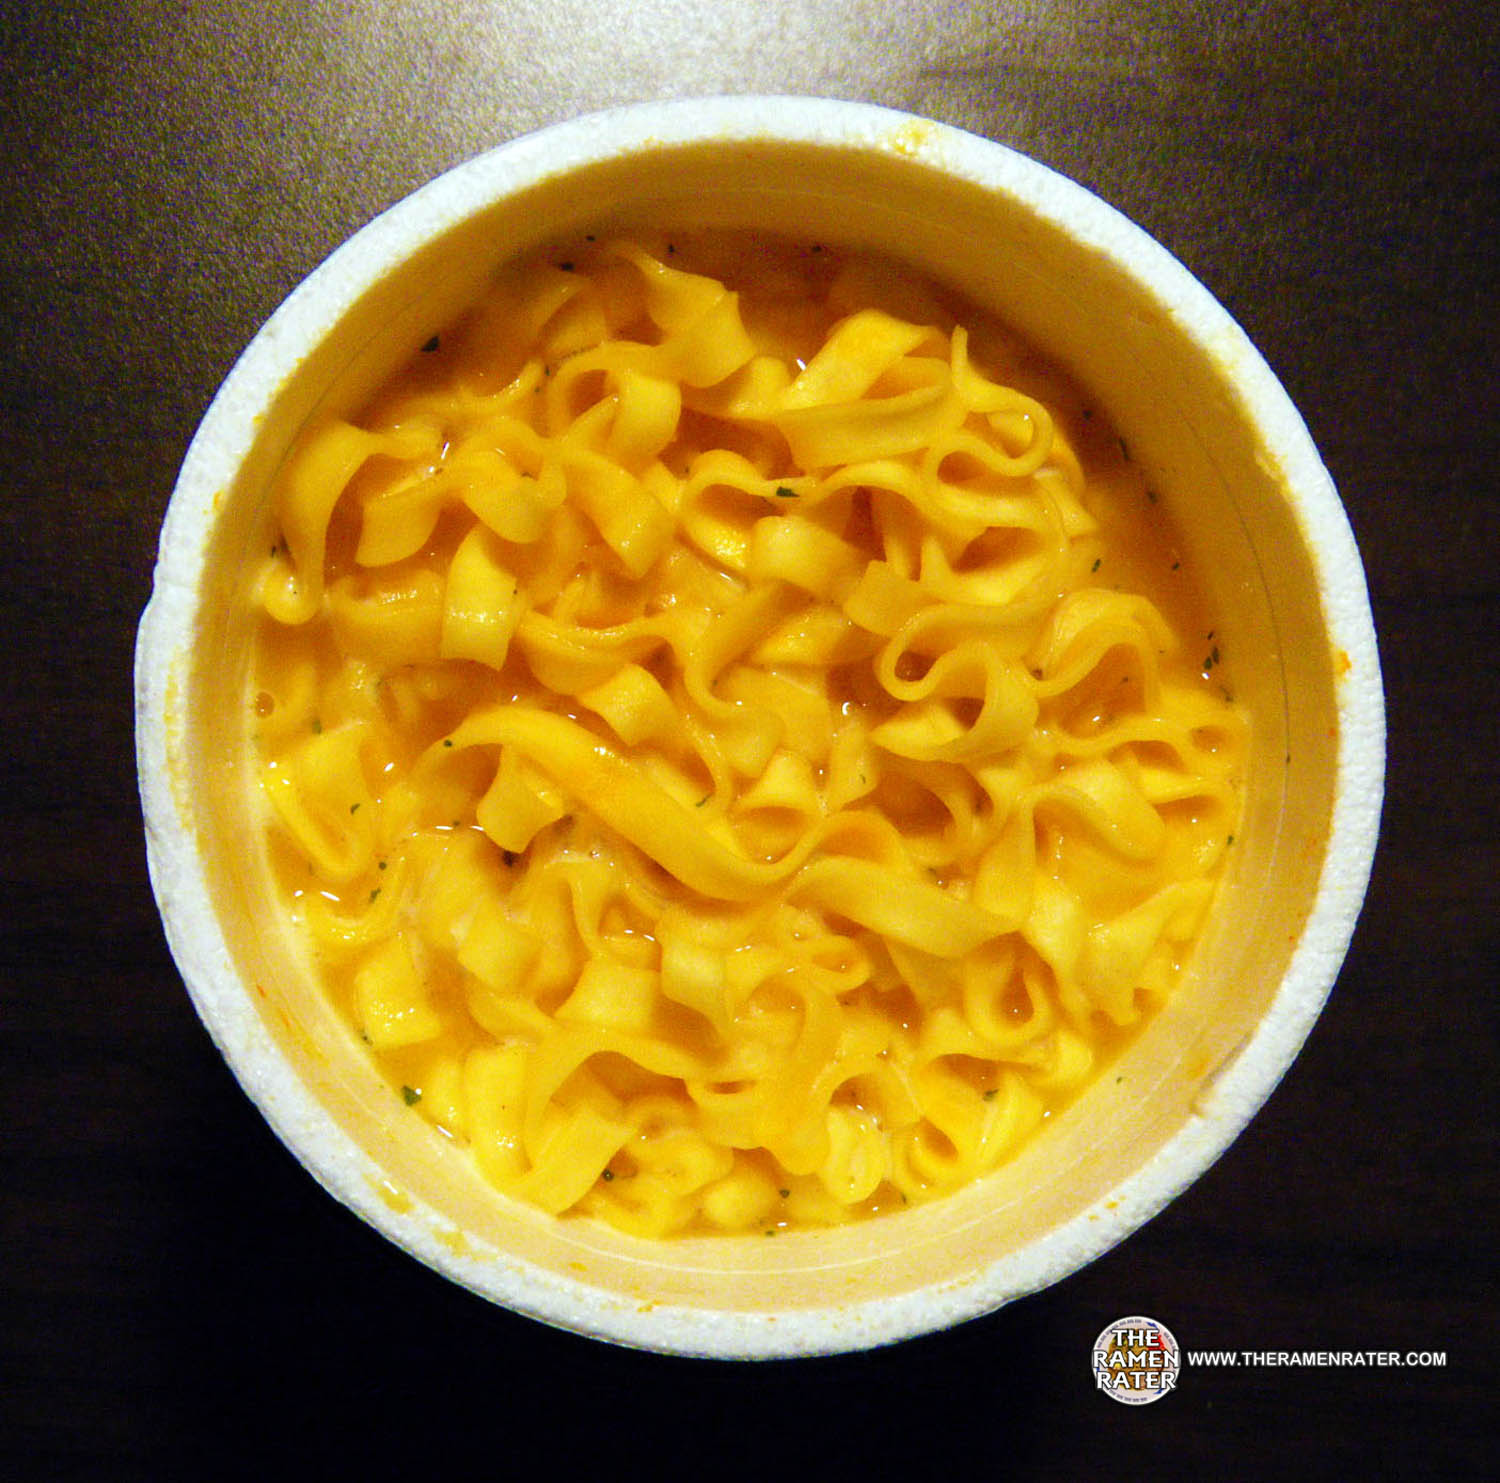 #388: Maruchan Instant Lunch Cheddar Cheese Flavor Ramen Noodles - The